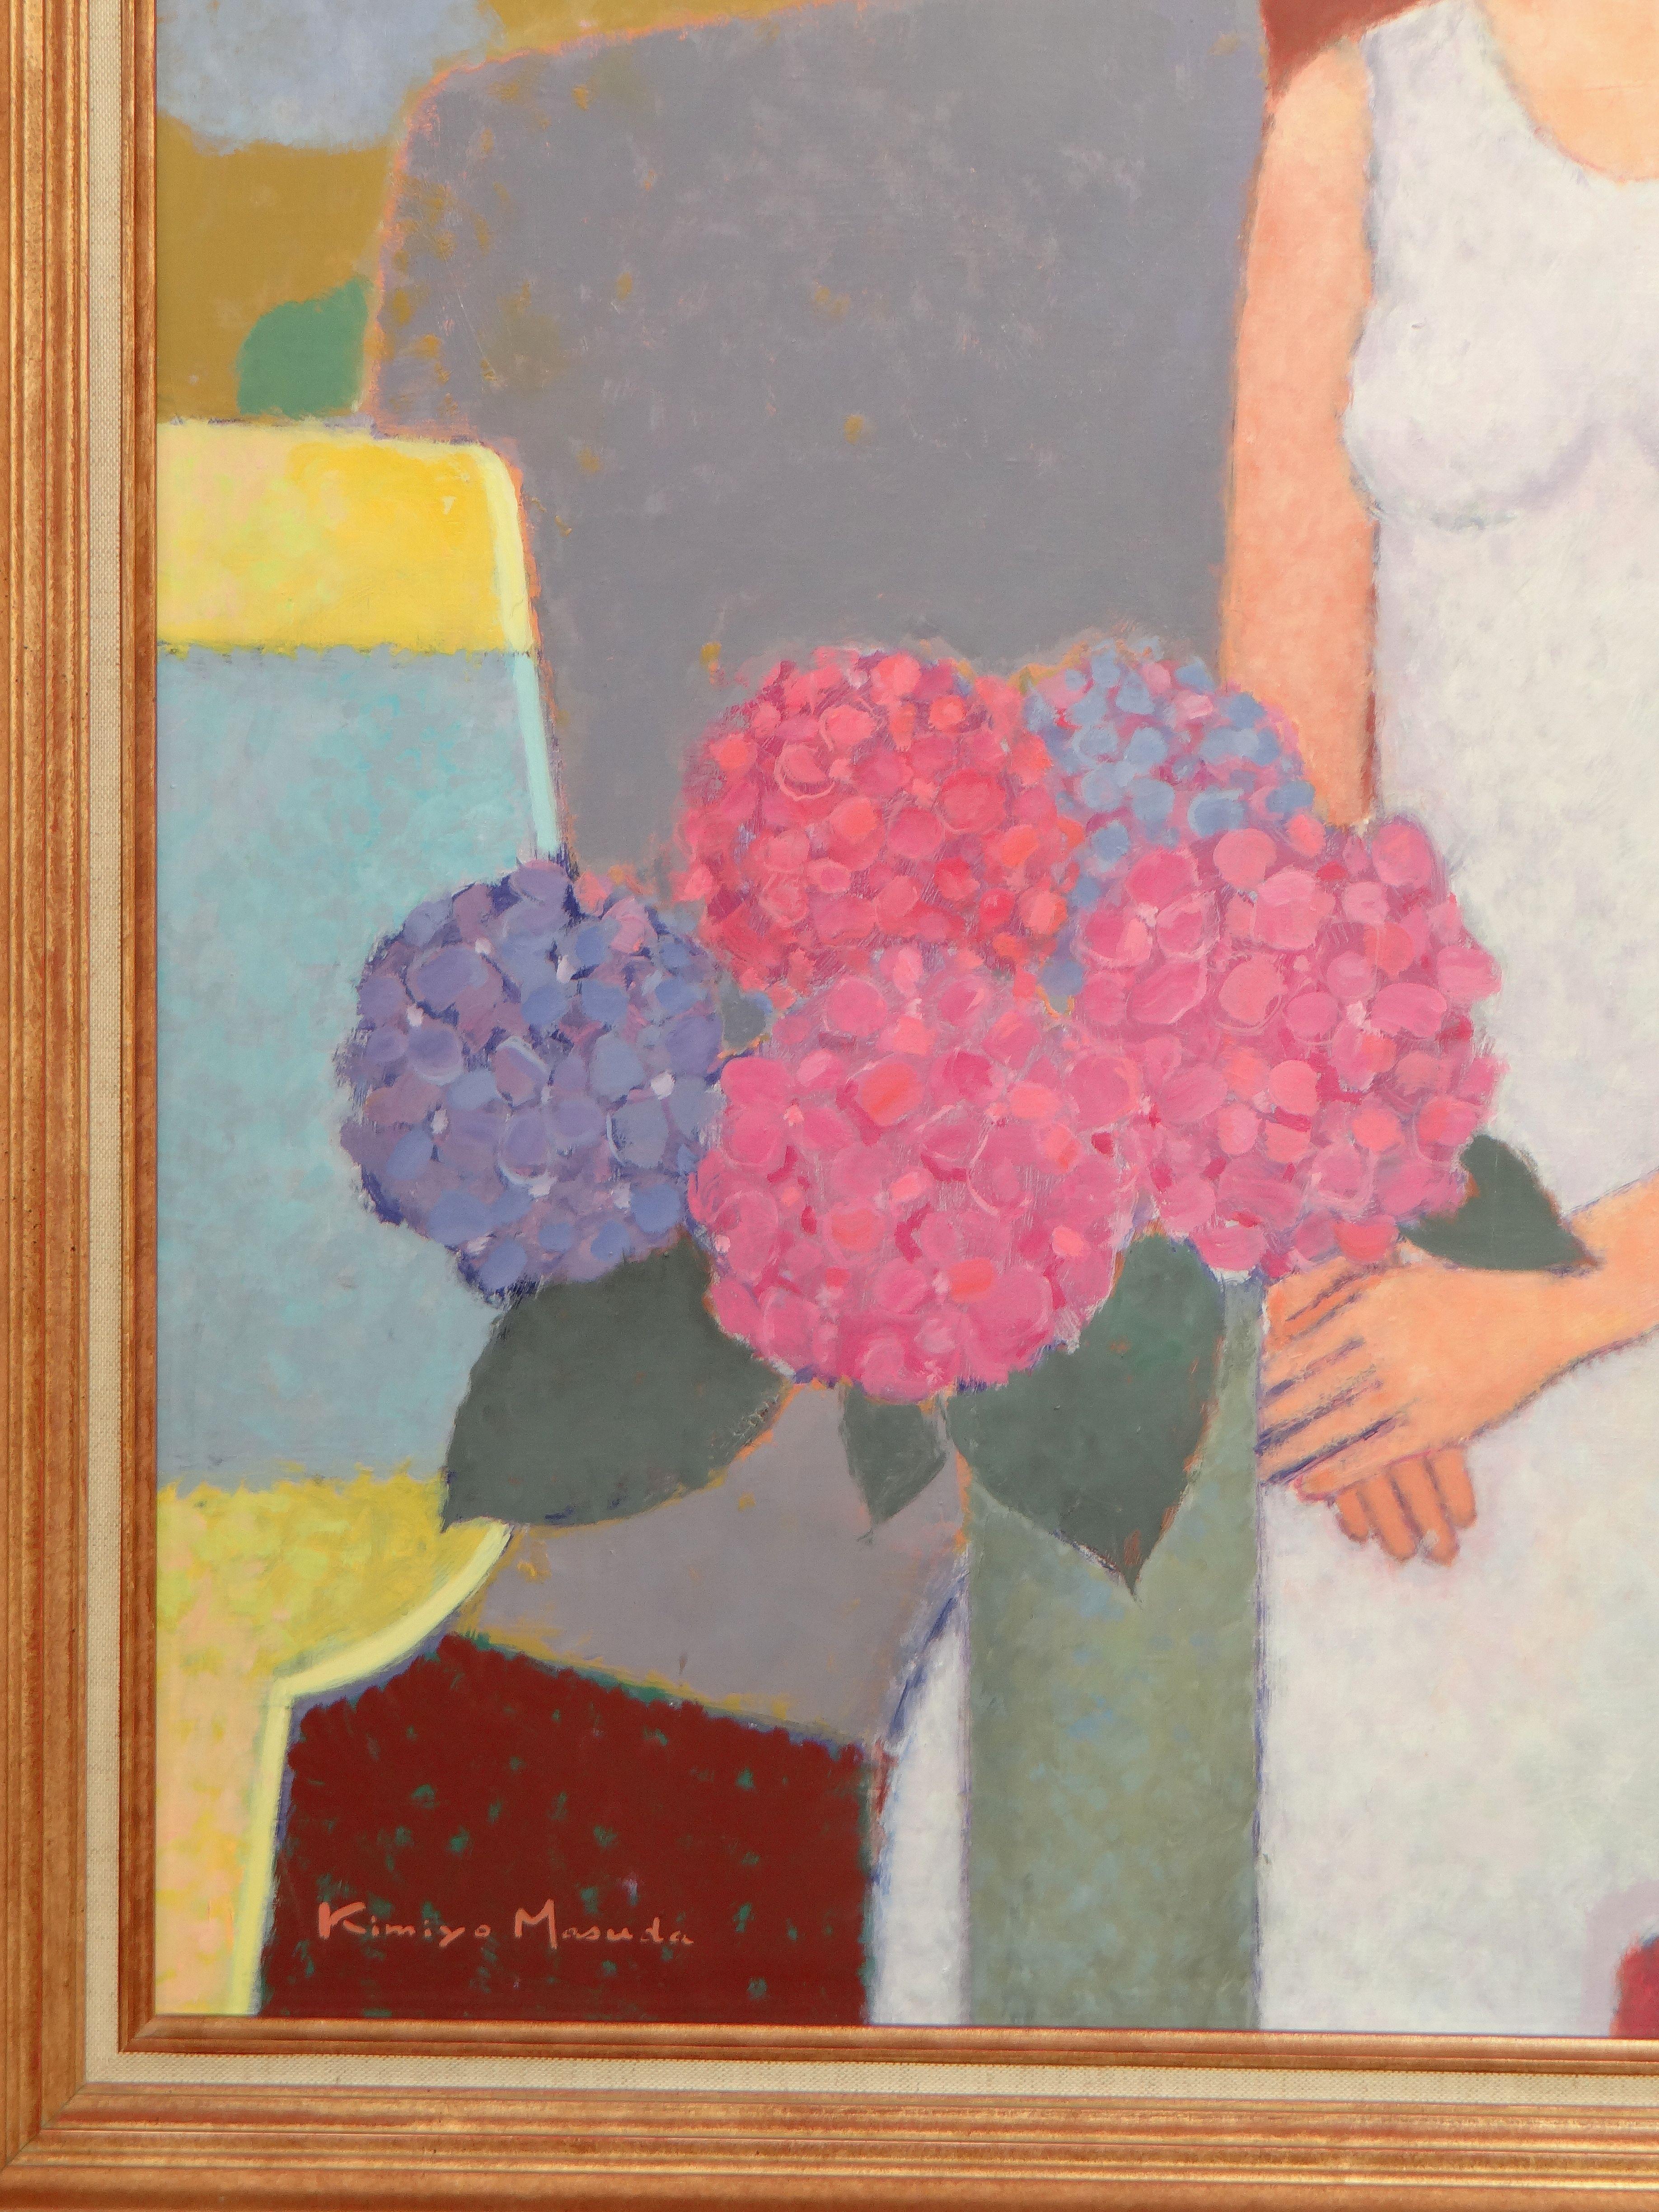 Kimiyo MASUDA, Painting Young Women with Bouquet of Flowers, 1988. For Sale 1